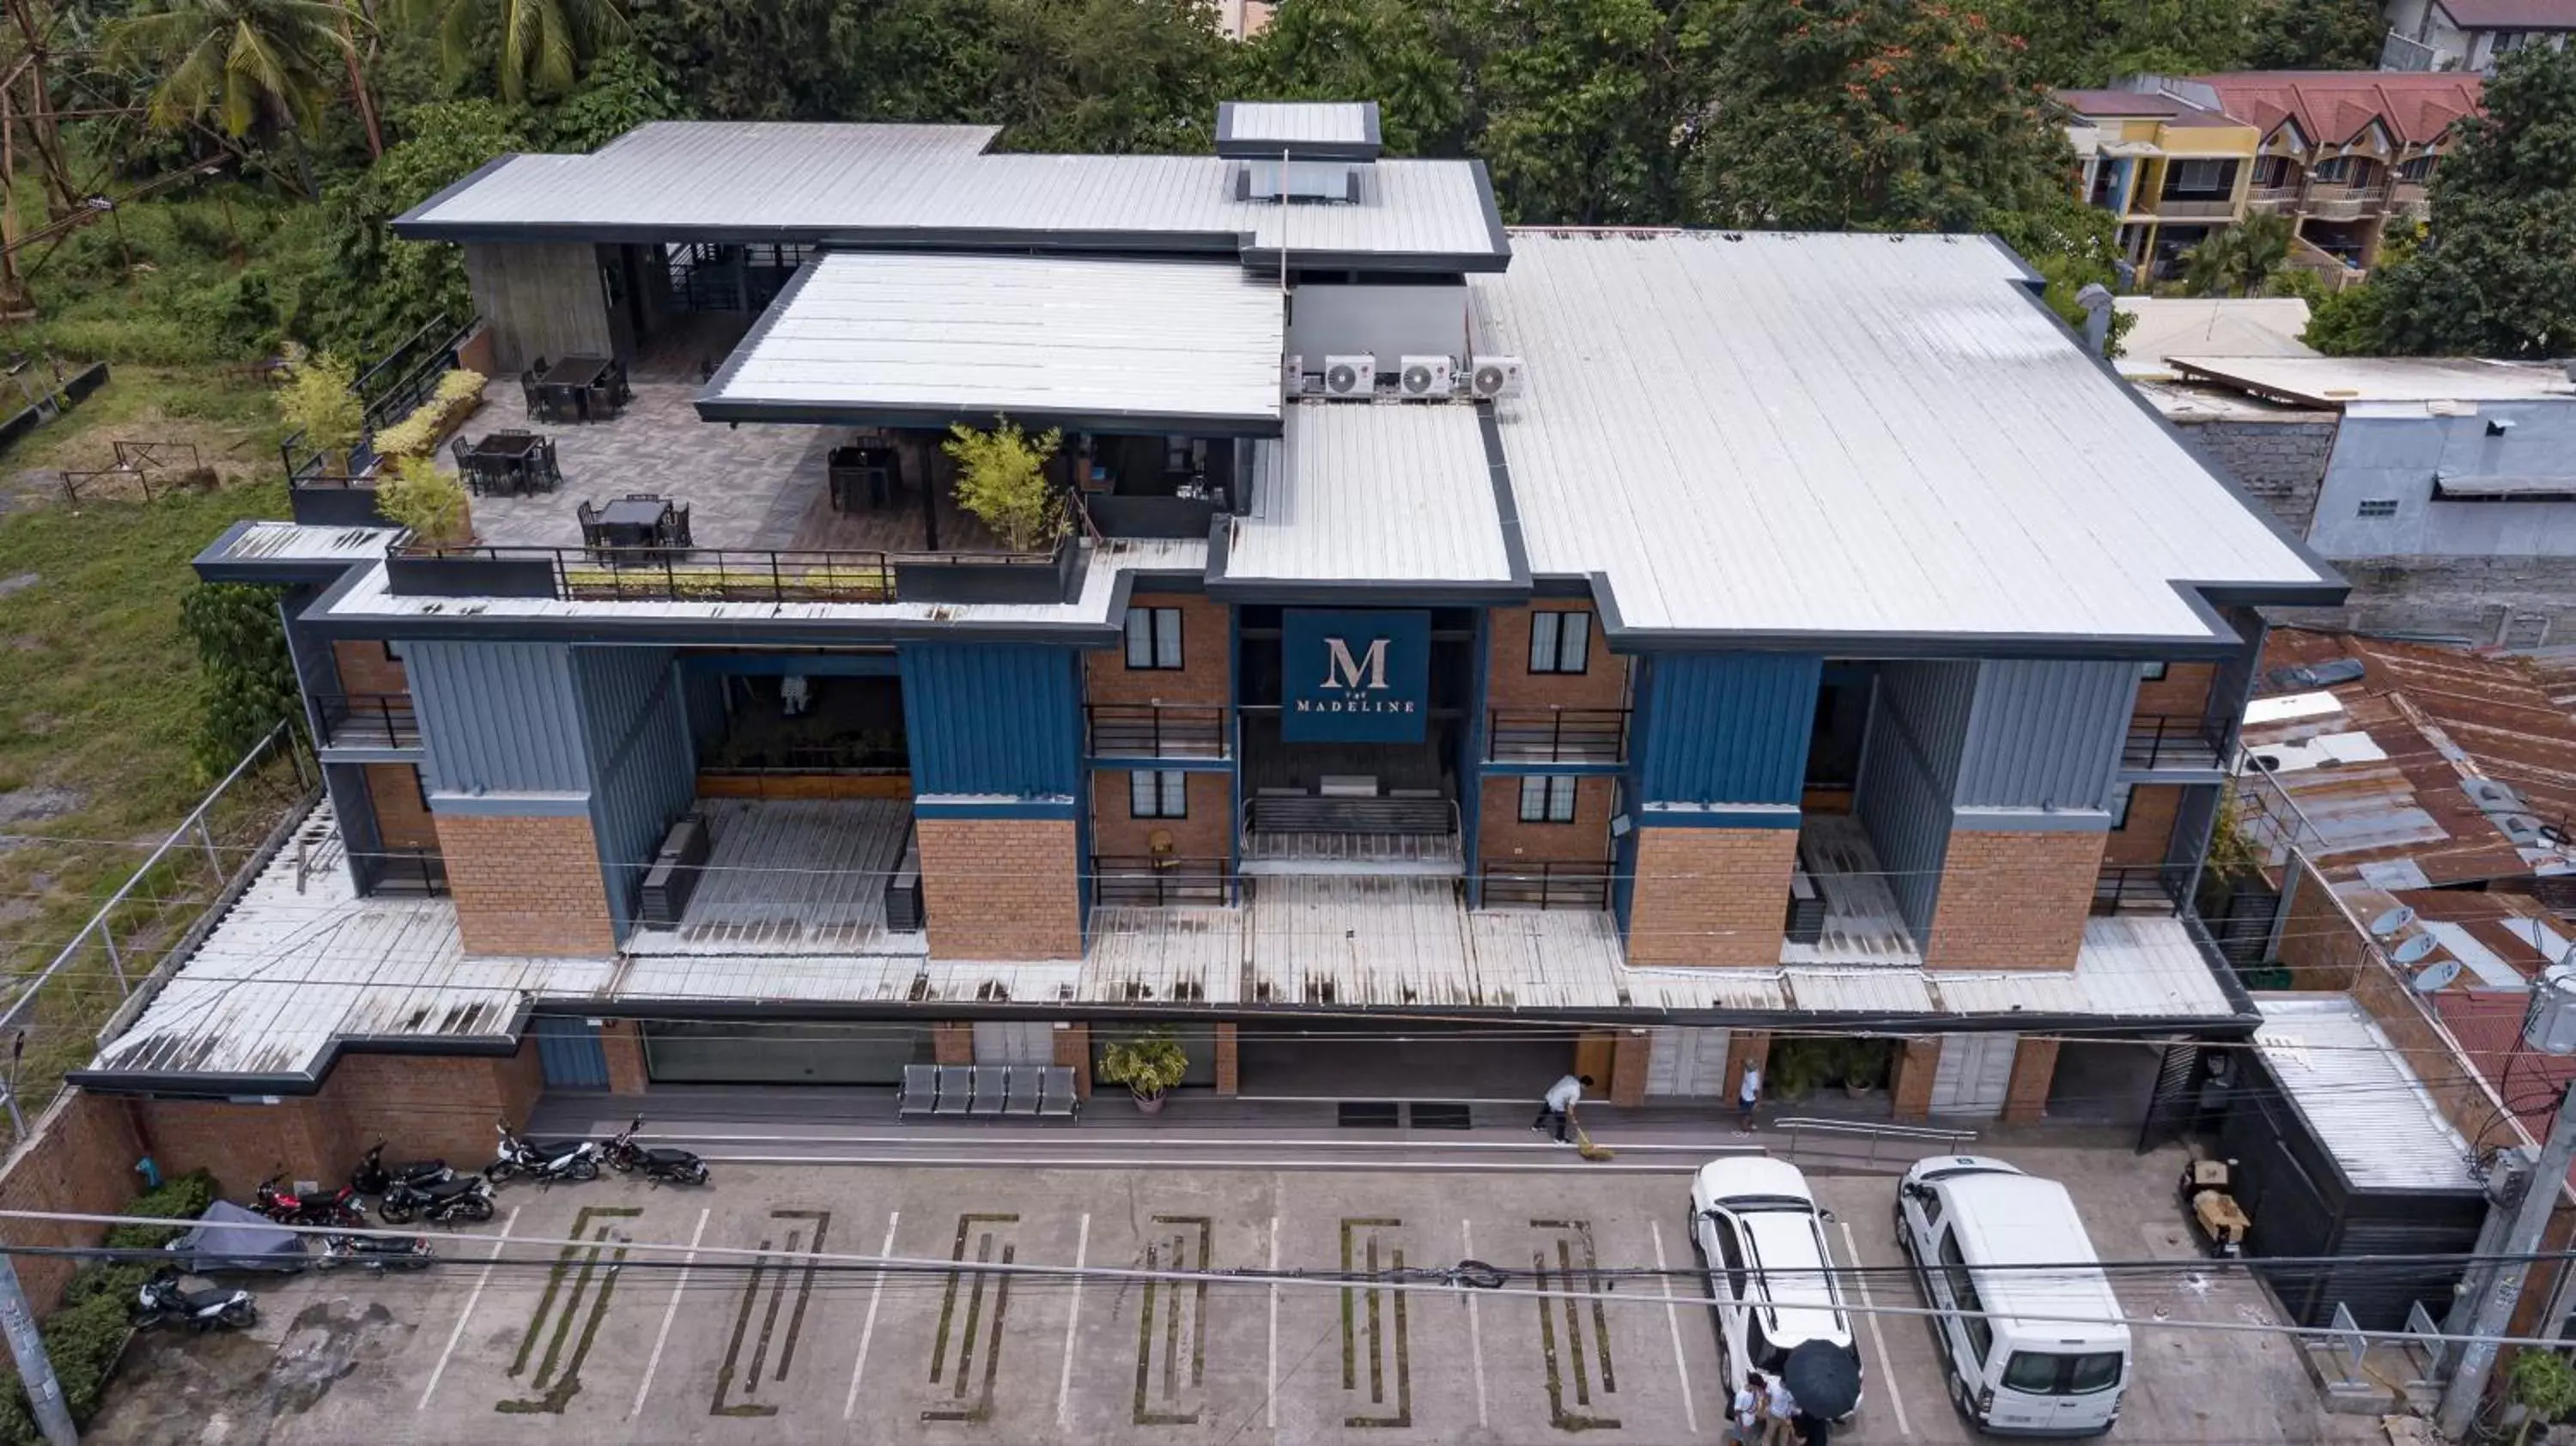 Property building, Bird's-eye View in The Madeline Boutique Hotel & Suites